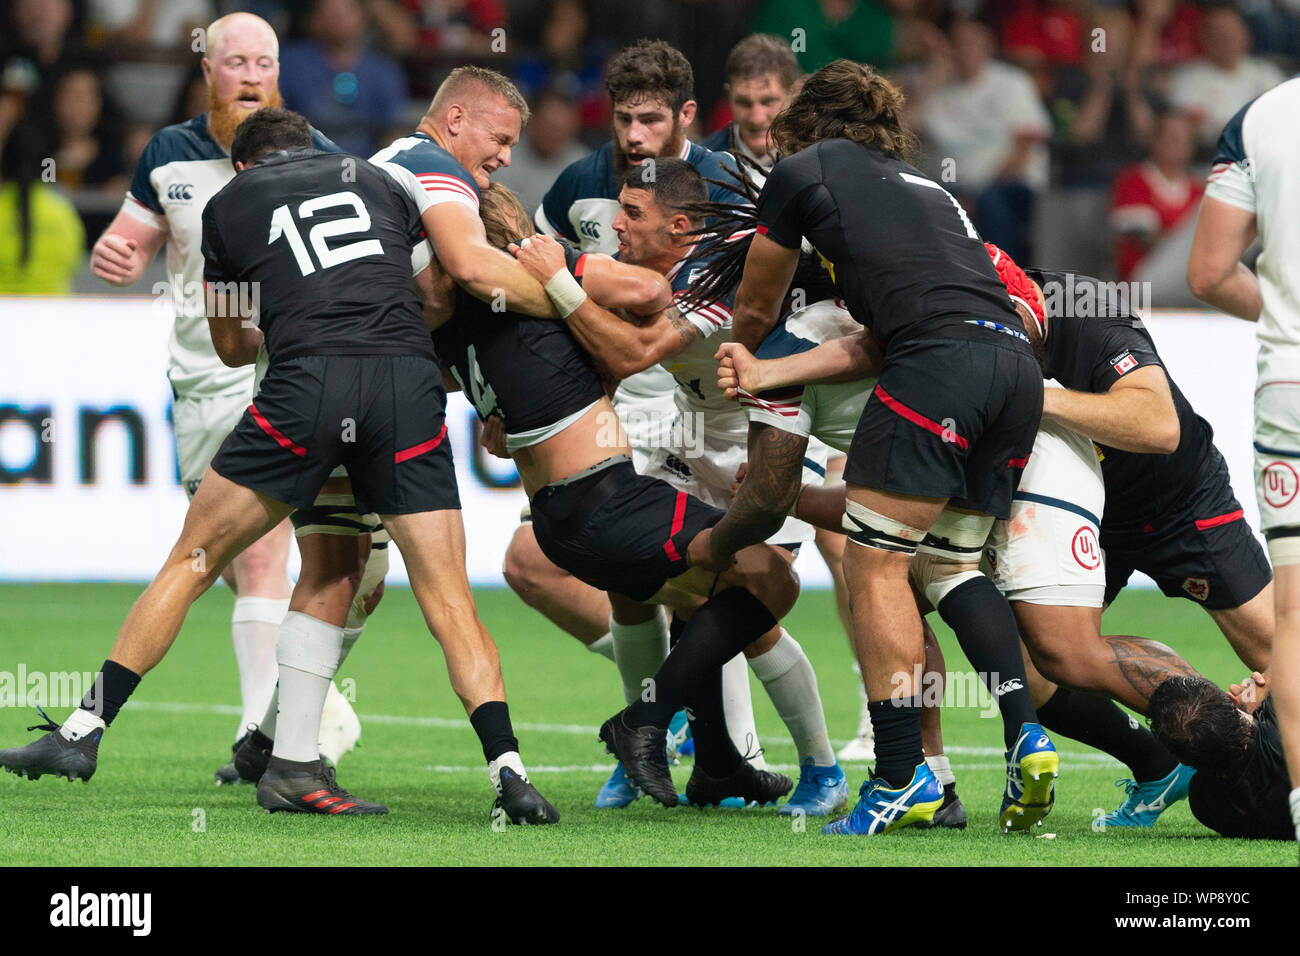 Vancouver, Canada. 7 September, 2019.  Canada Jeff Hassler (14),(black center), being taken down by U.S.A. Hanco Germishuys (7)(left), and U.S.A. Nate Augspurger (9),(right). USA wins 25-15. World Cup Rugby pre-game - Canada vs USA, at BC Place Stadium, Vancouver, Canada. Gerry Rousseau/Alamy Live News Stock Photo